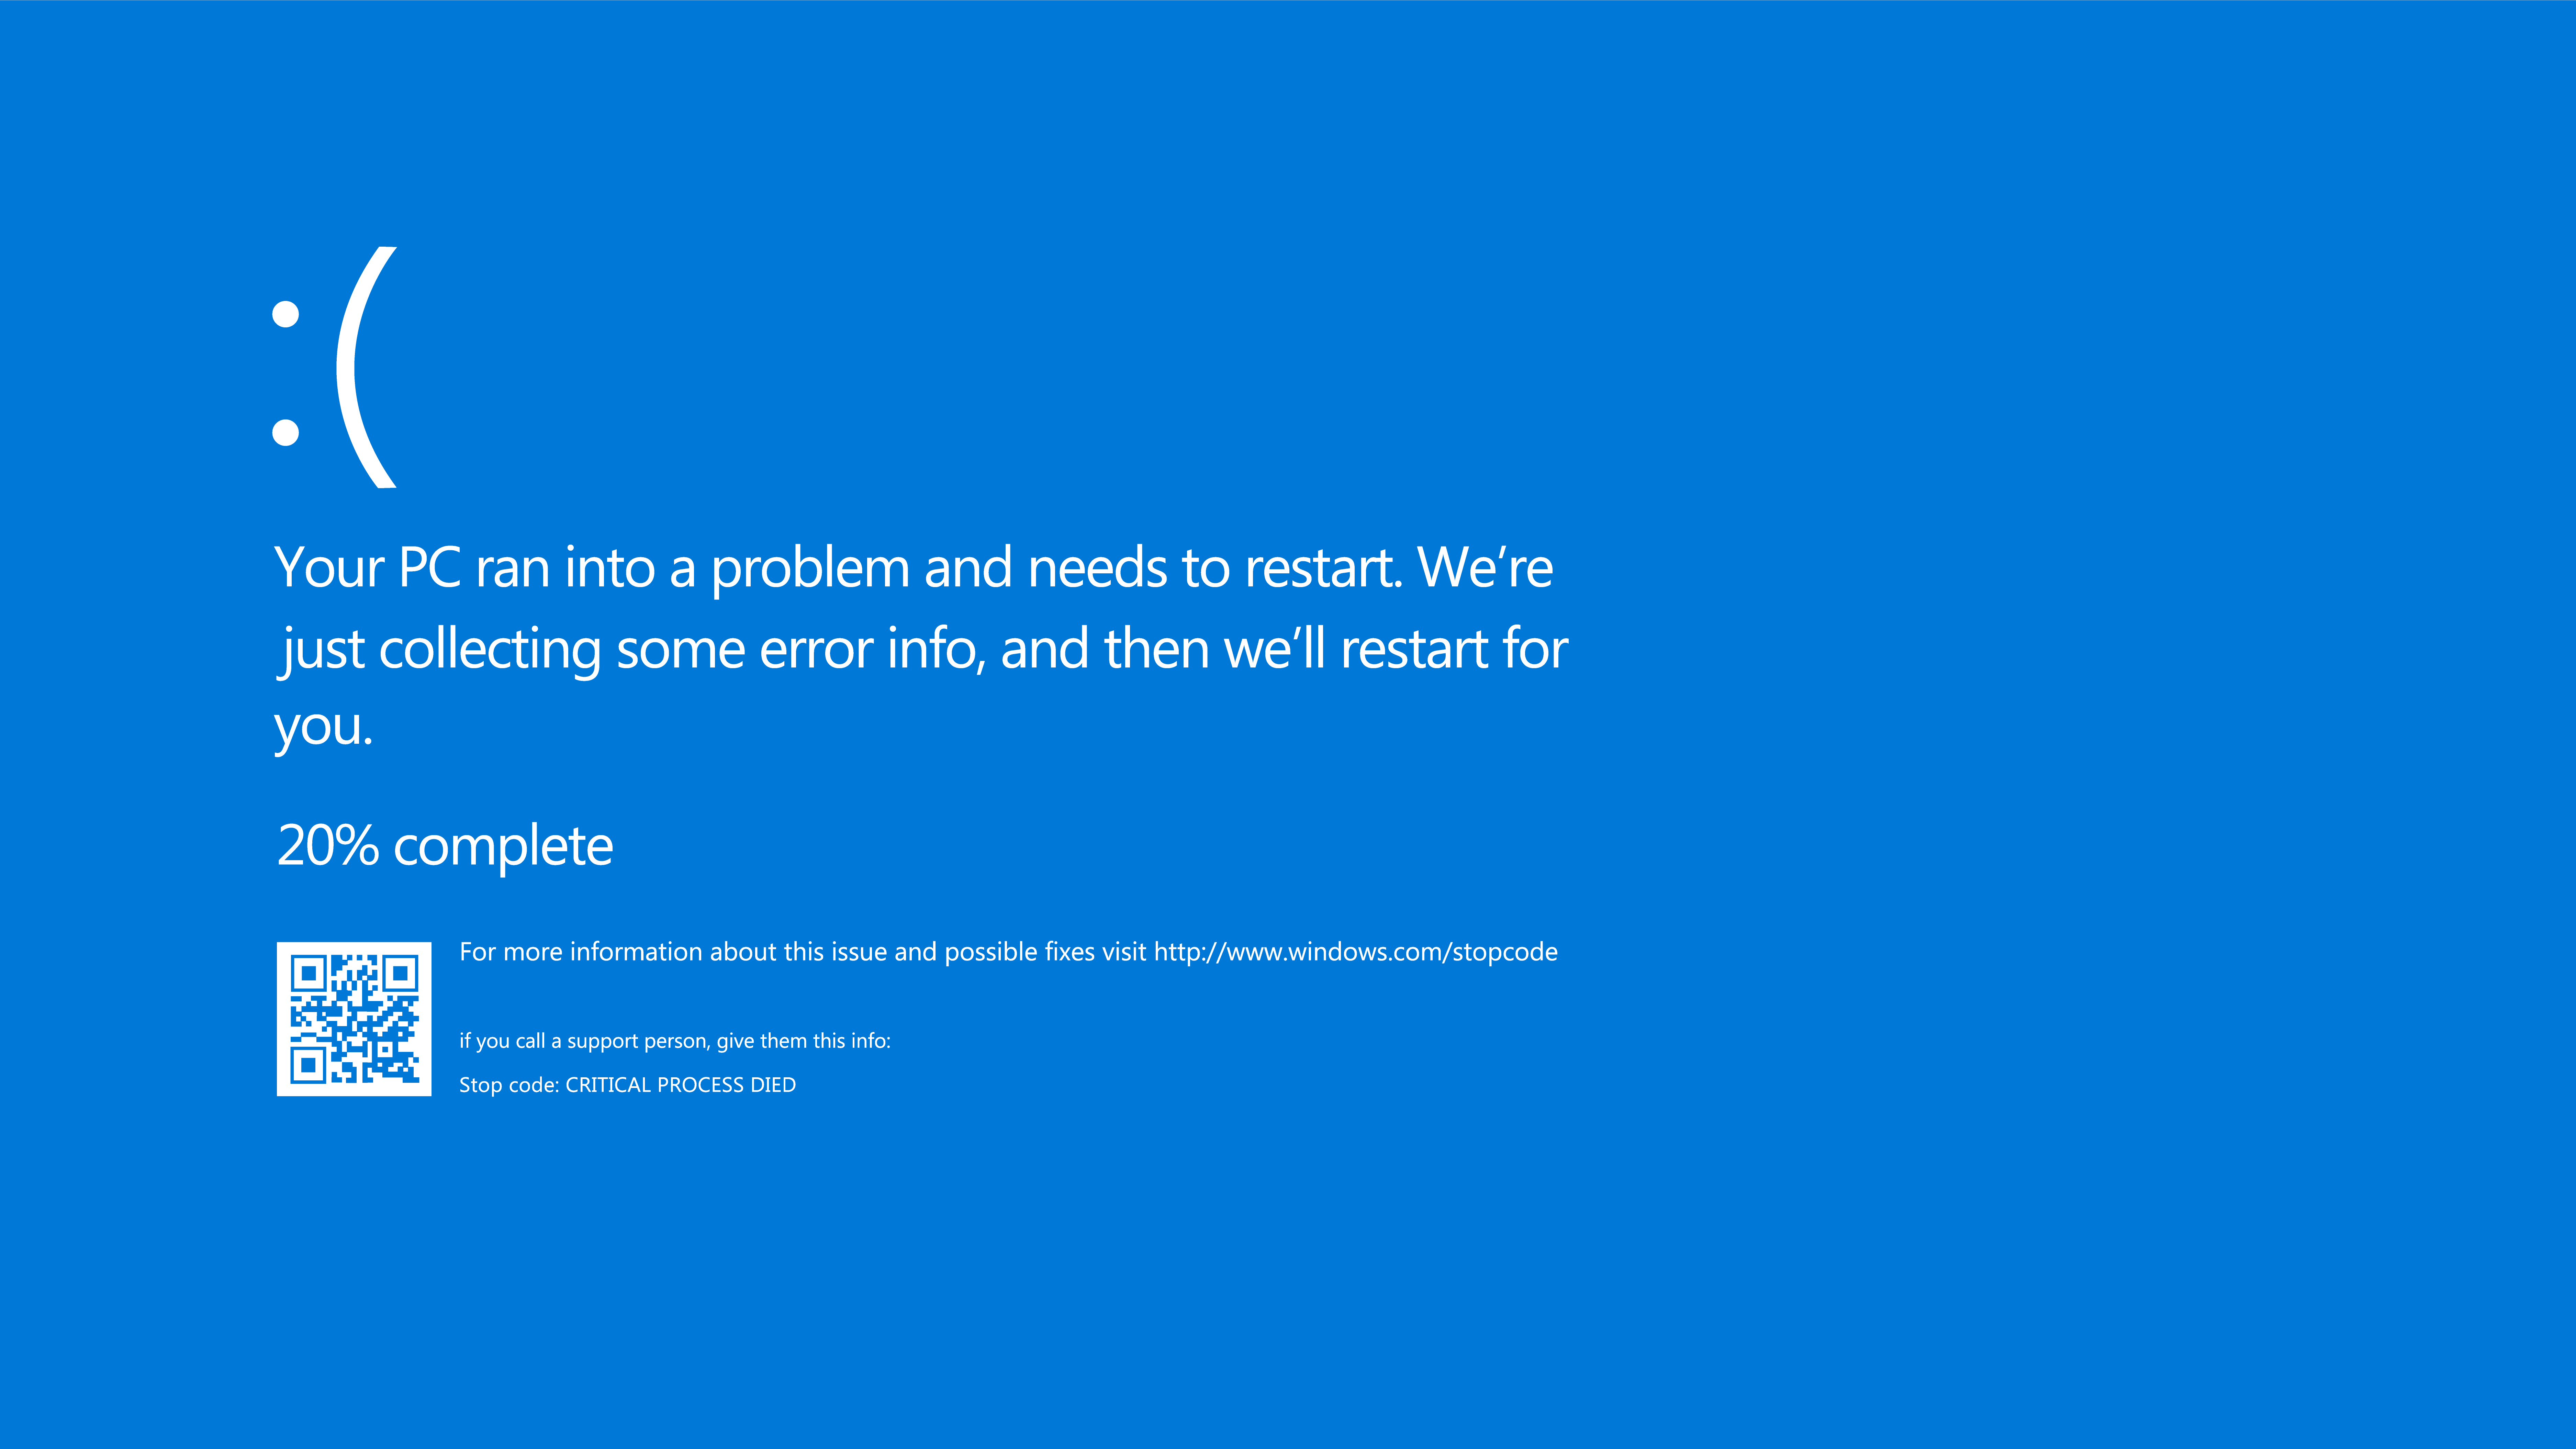  Infamous BSOD appears across Windows machines globally as suspected security bug grounds planes, hits health services 